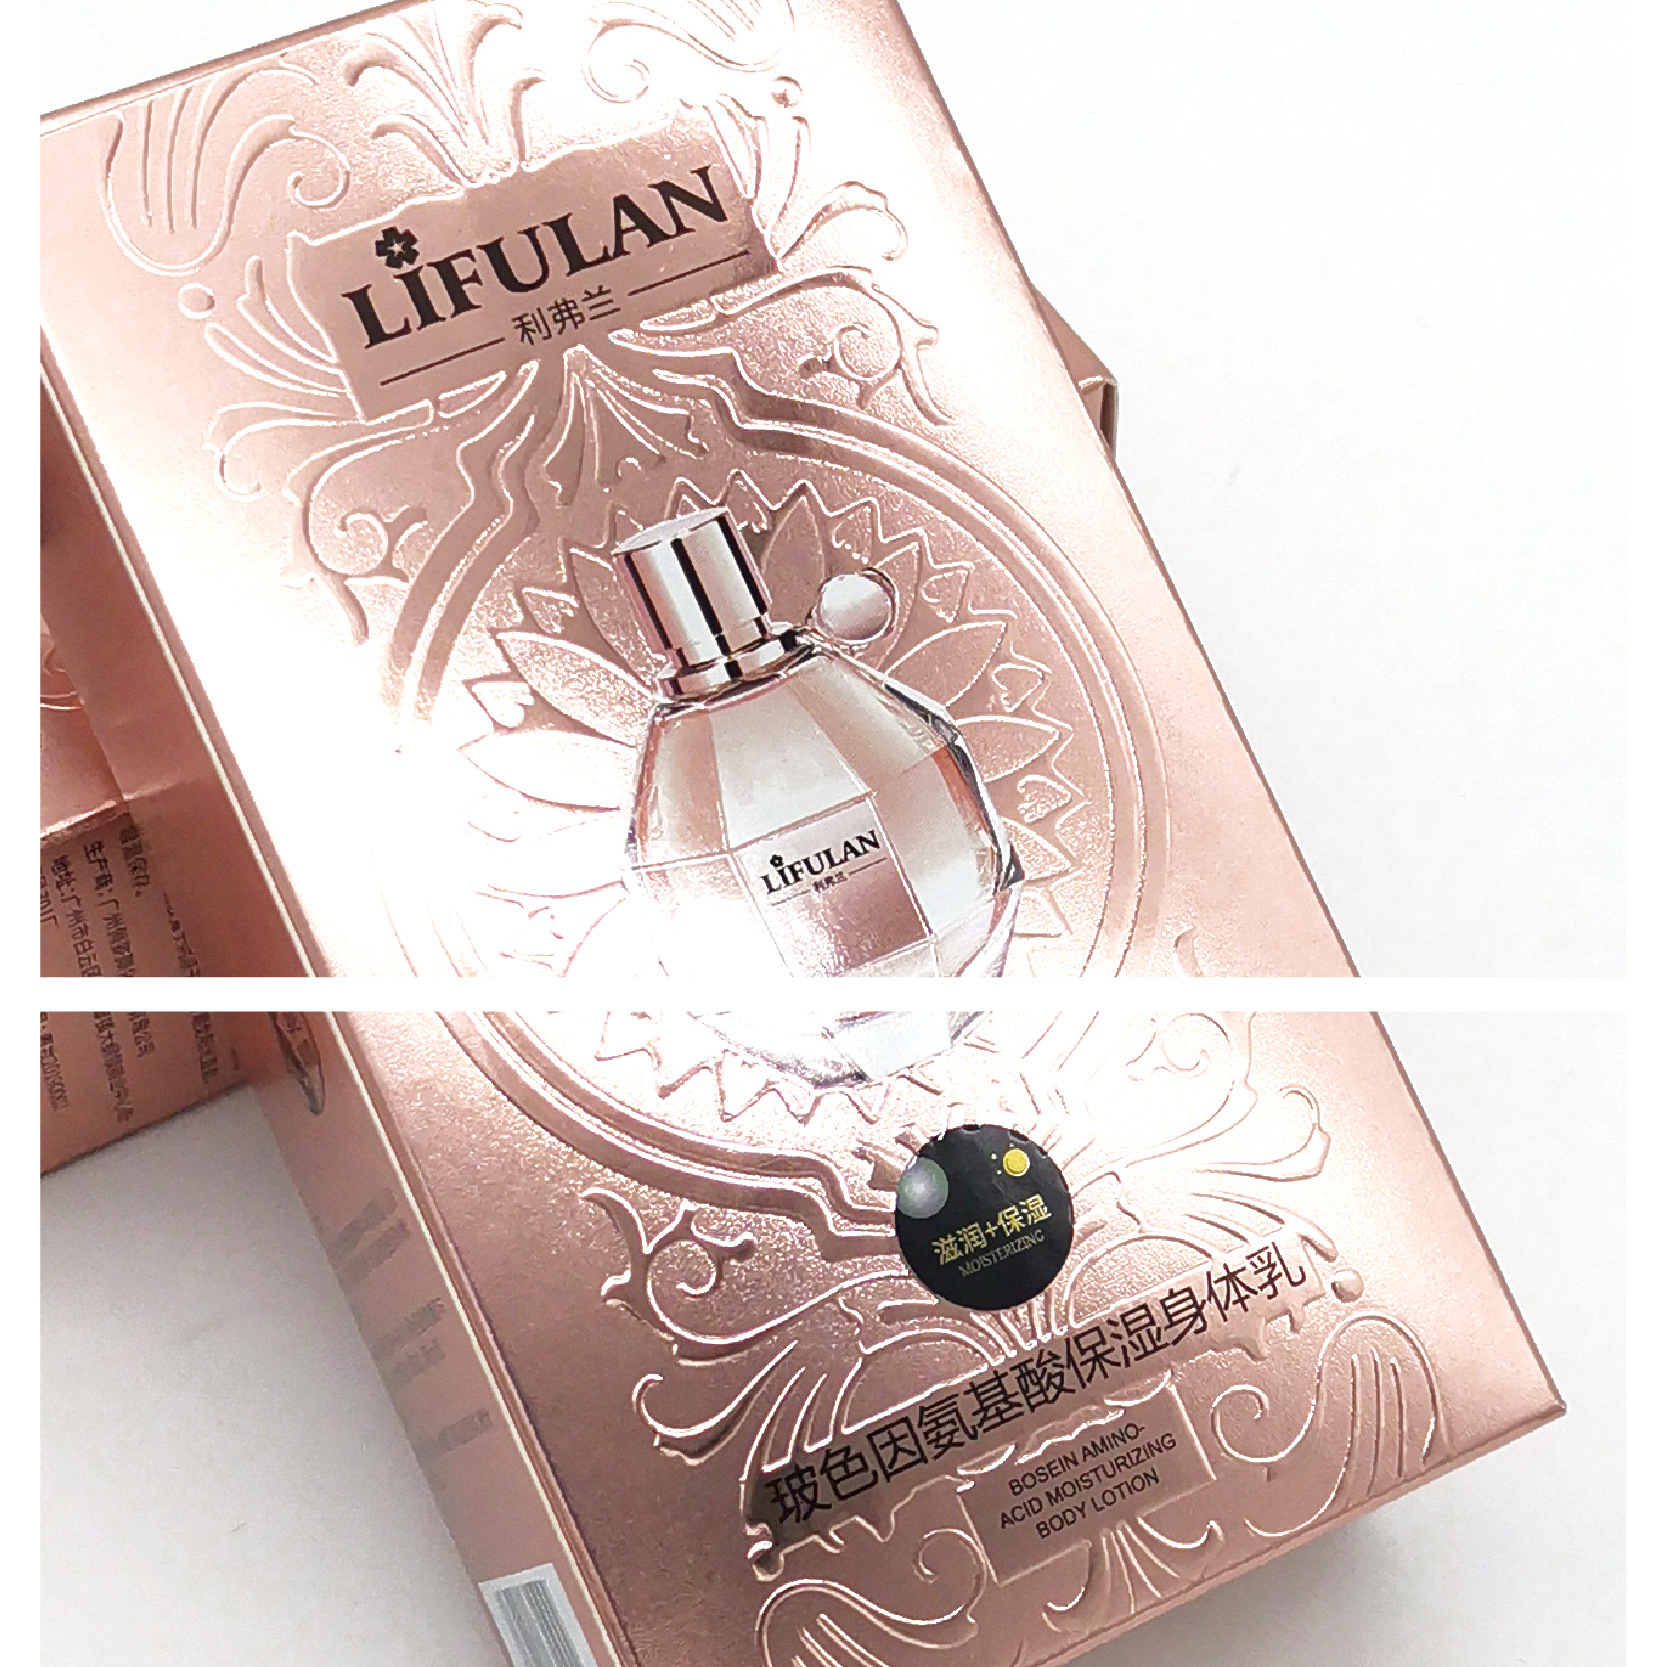 Rose Gold Embossing Perfume Boxes